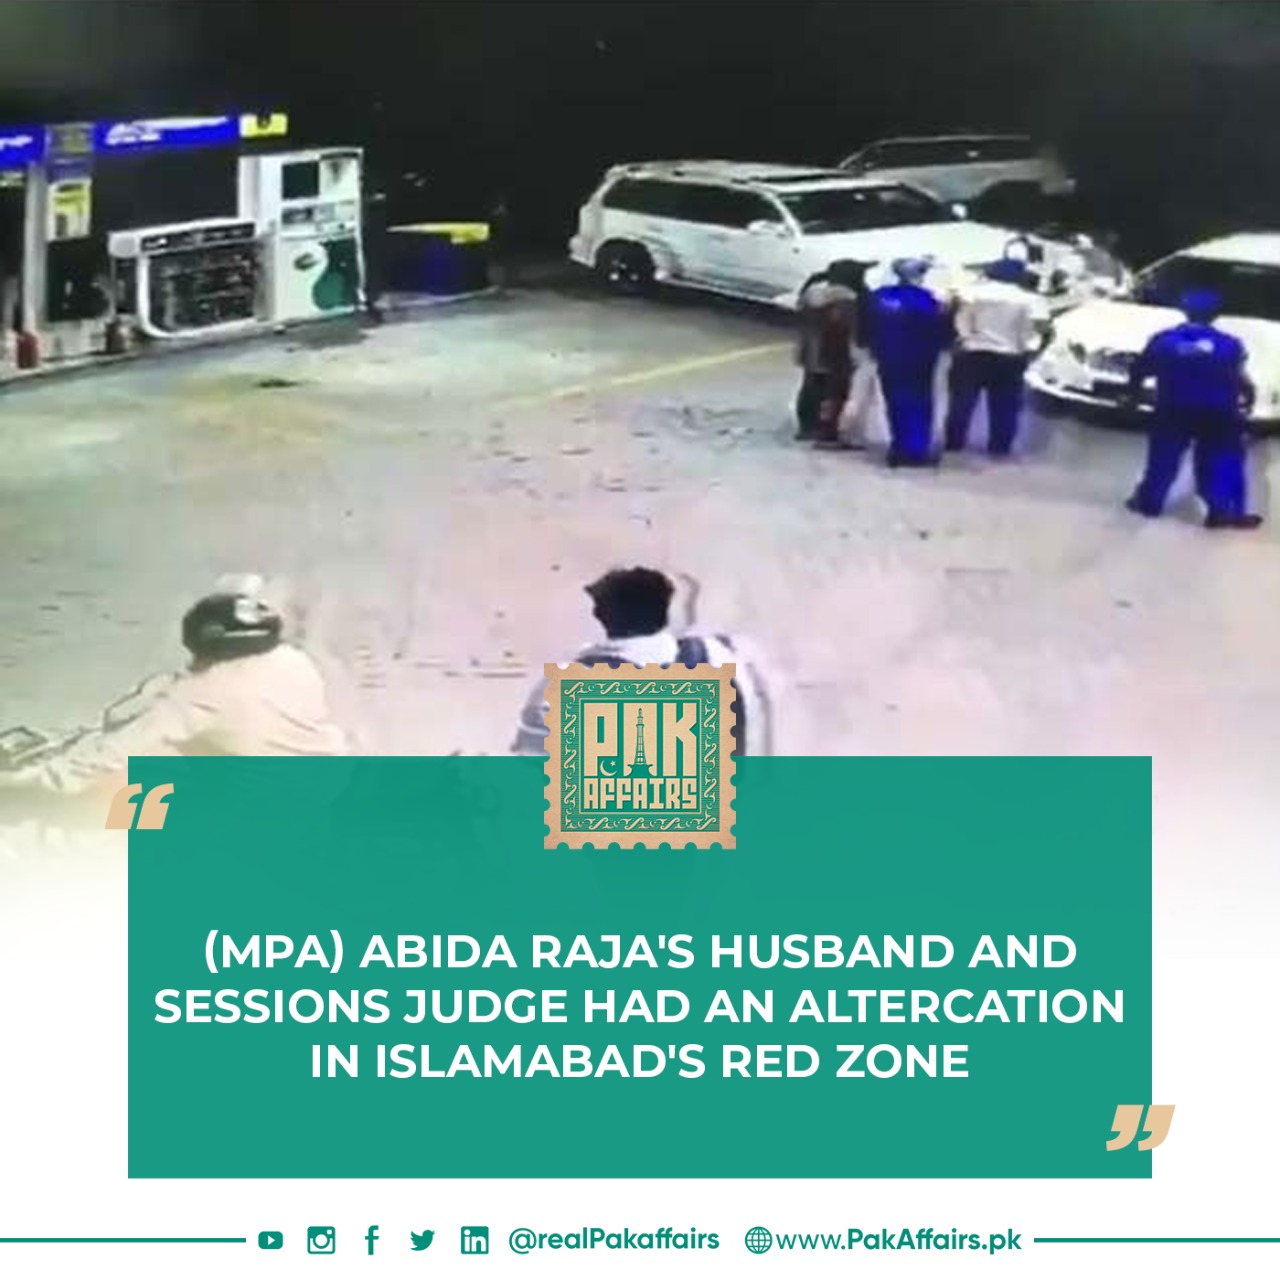 (MPA) Abida Raja's husband and Sessions Judge had an altercation in Islamabad's Red zone.